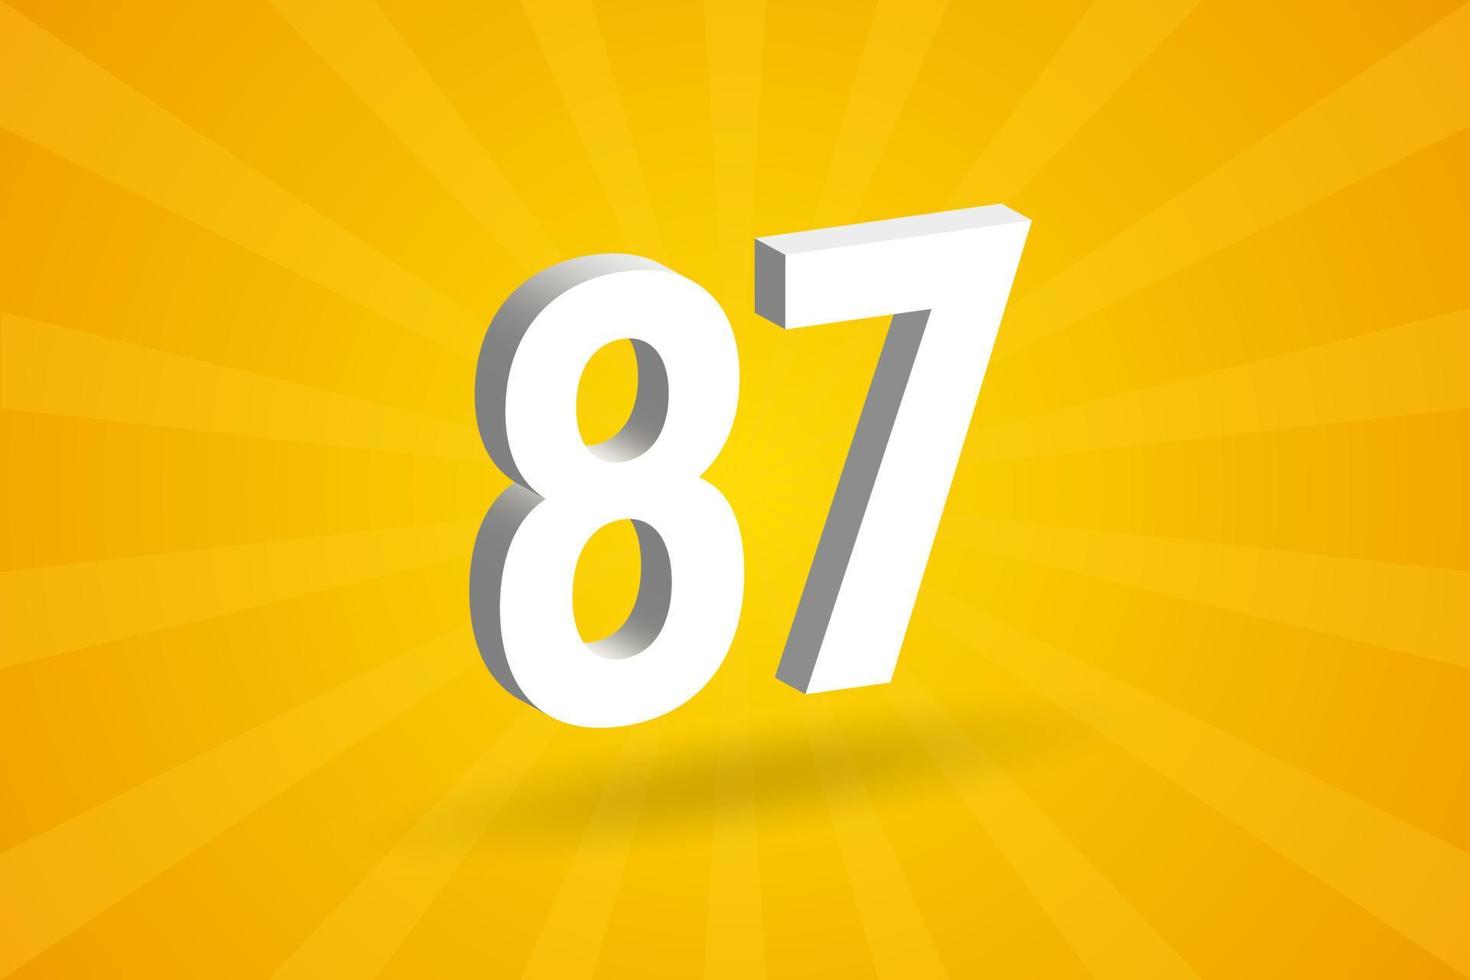 3D 87 number font alphabet. White 3D Number 87 with yellow background vector